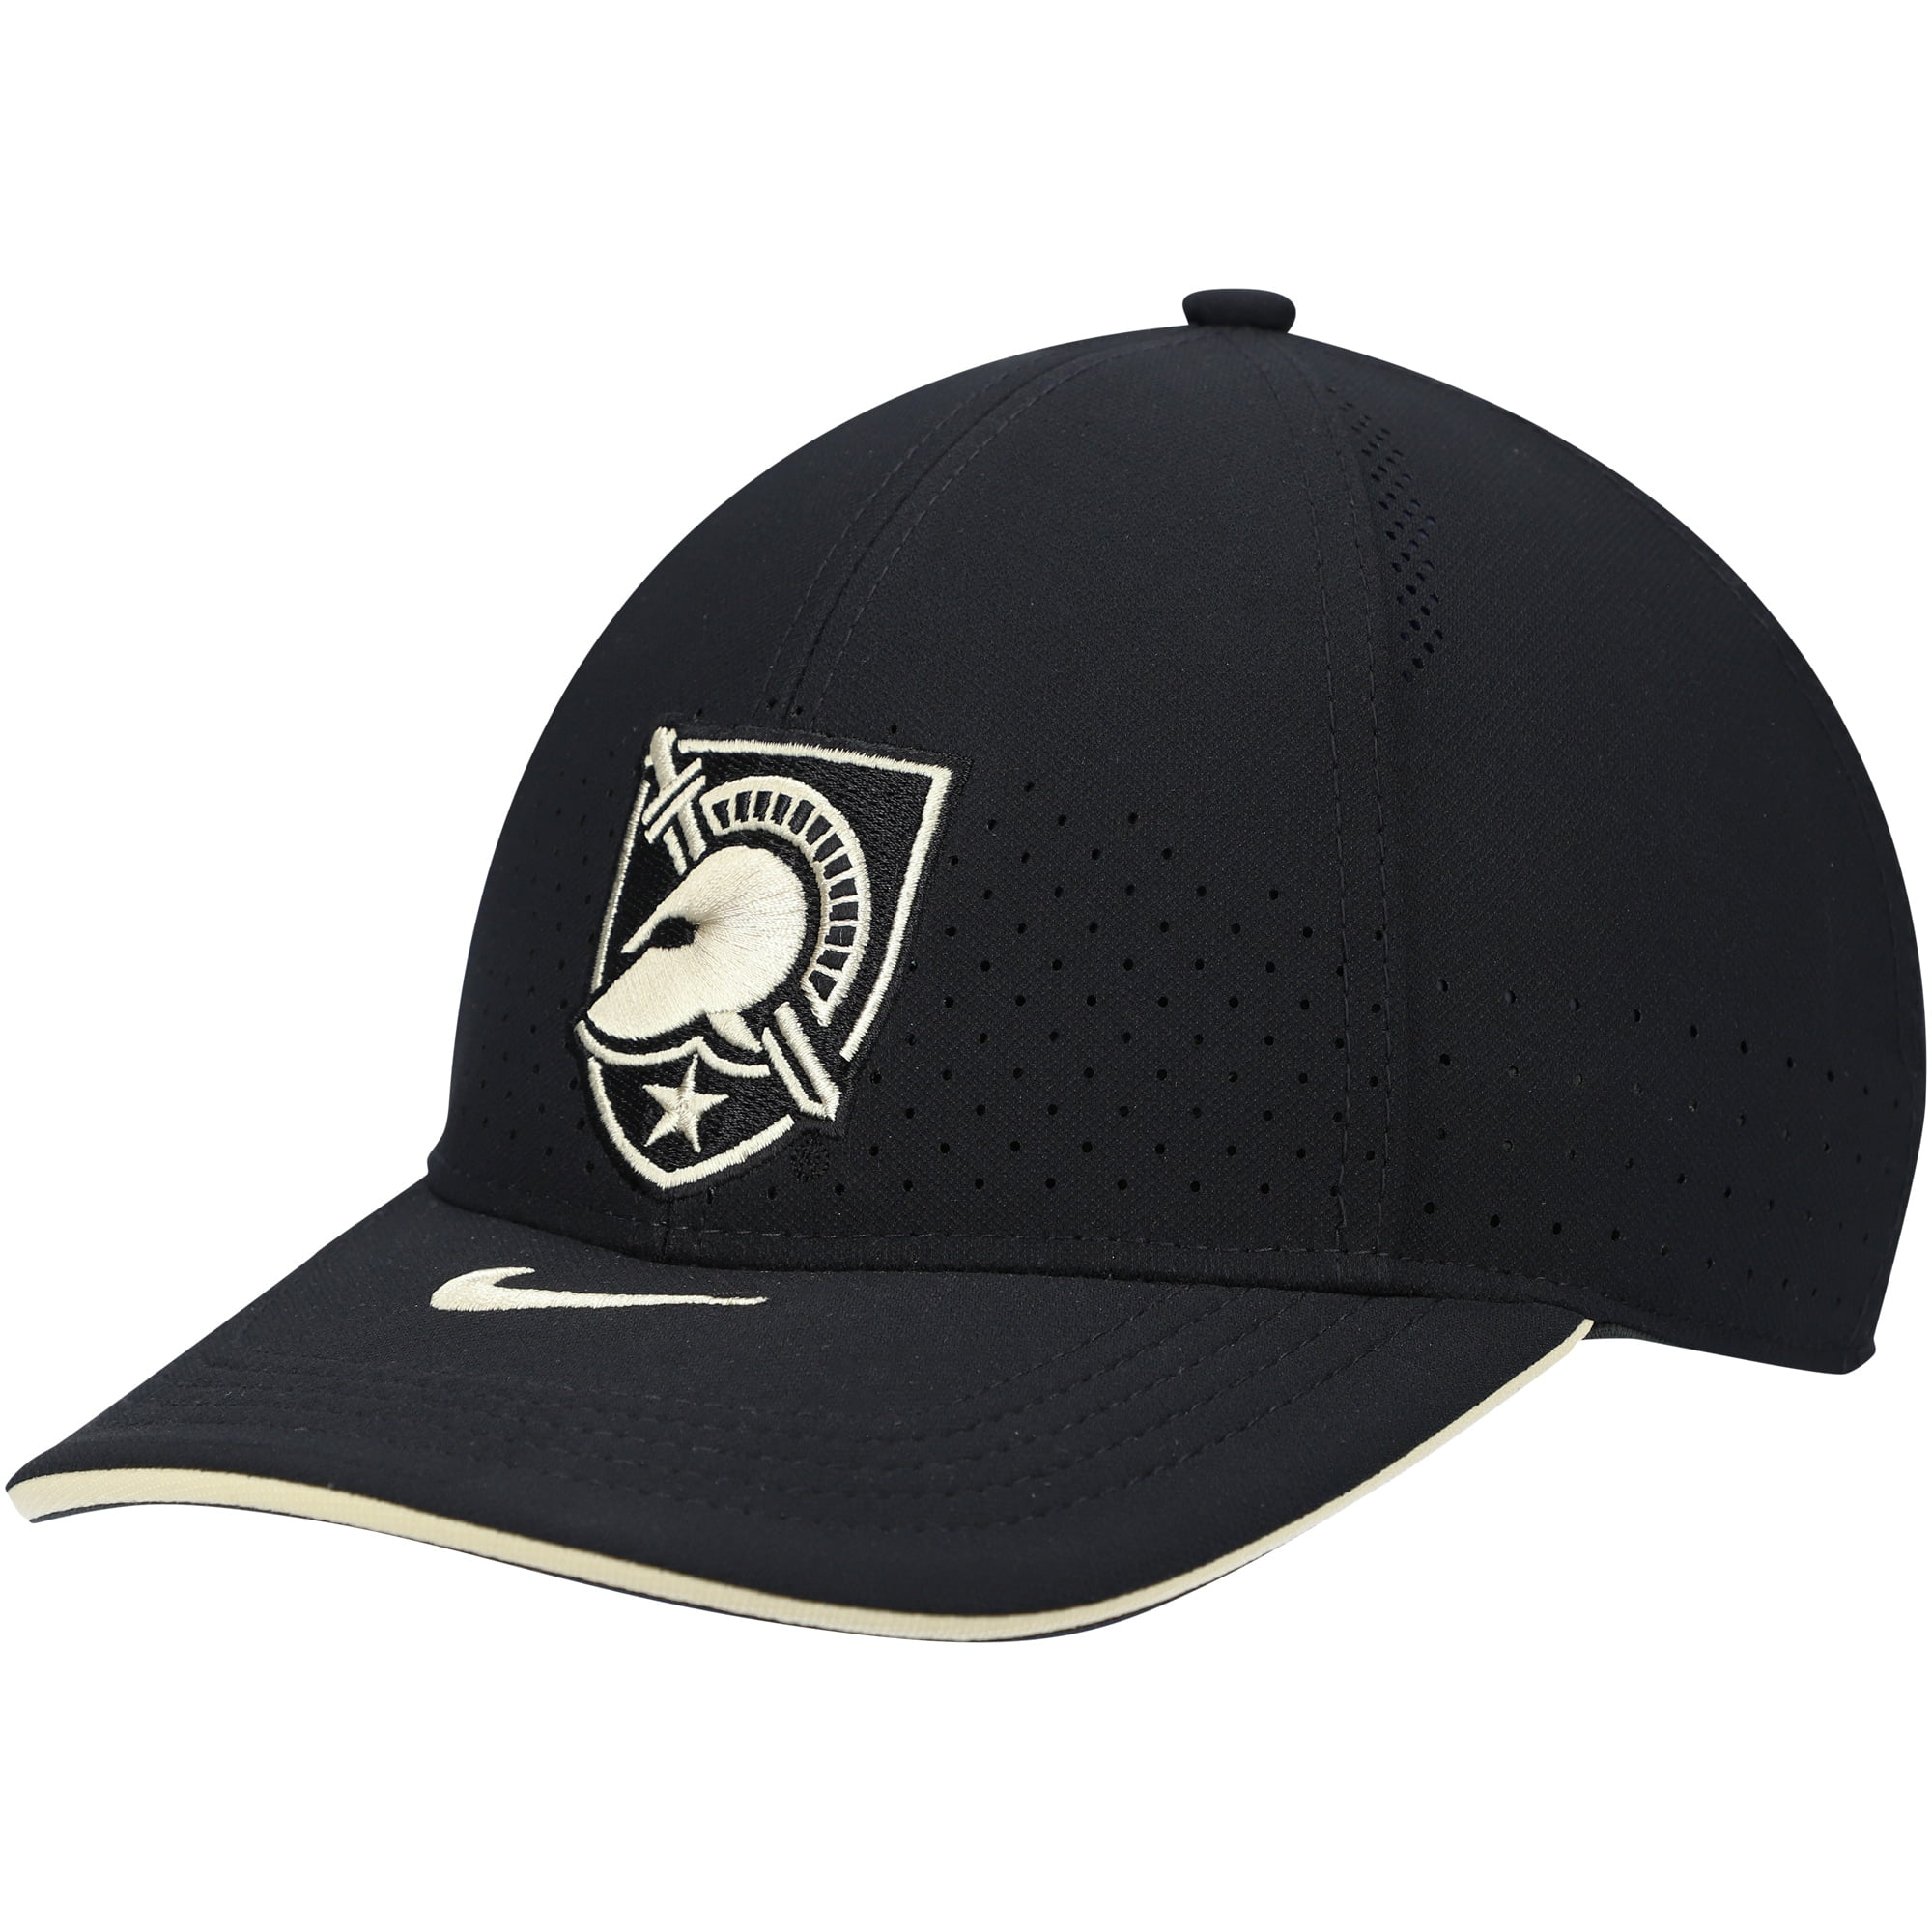 Army Black Knights Hat - Army Military